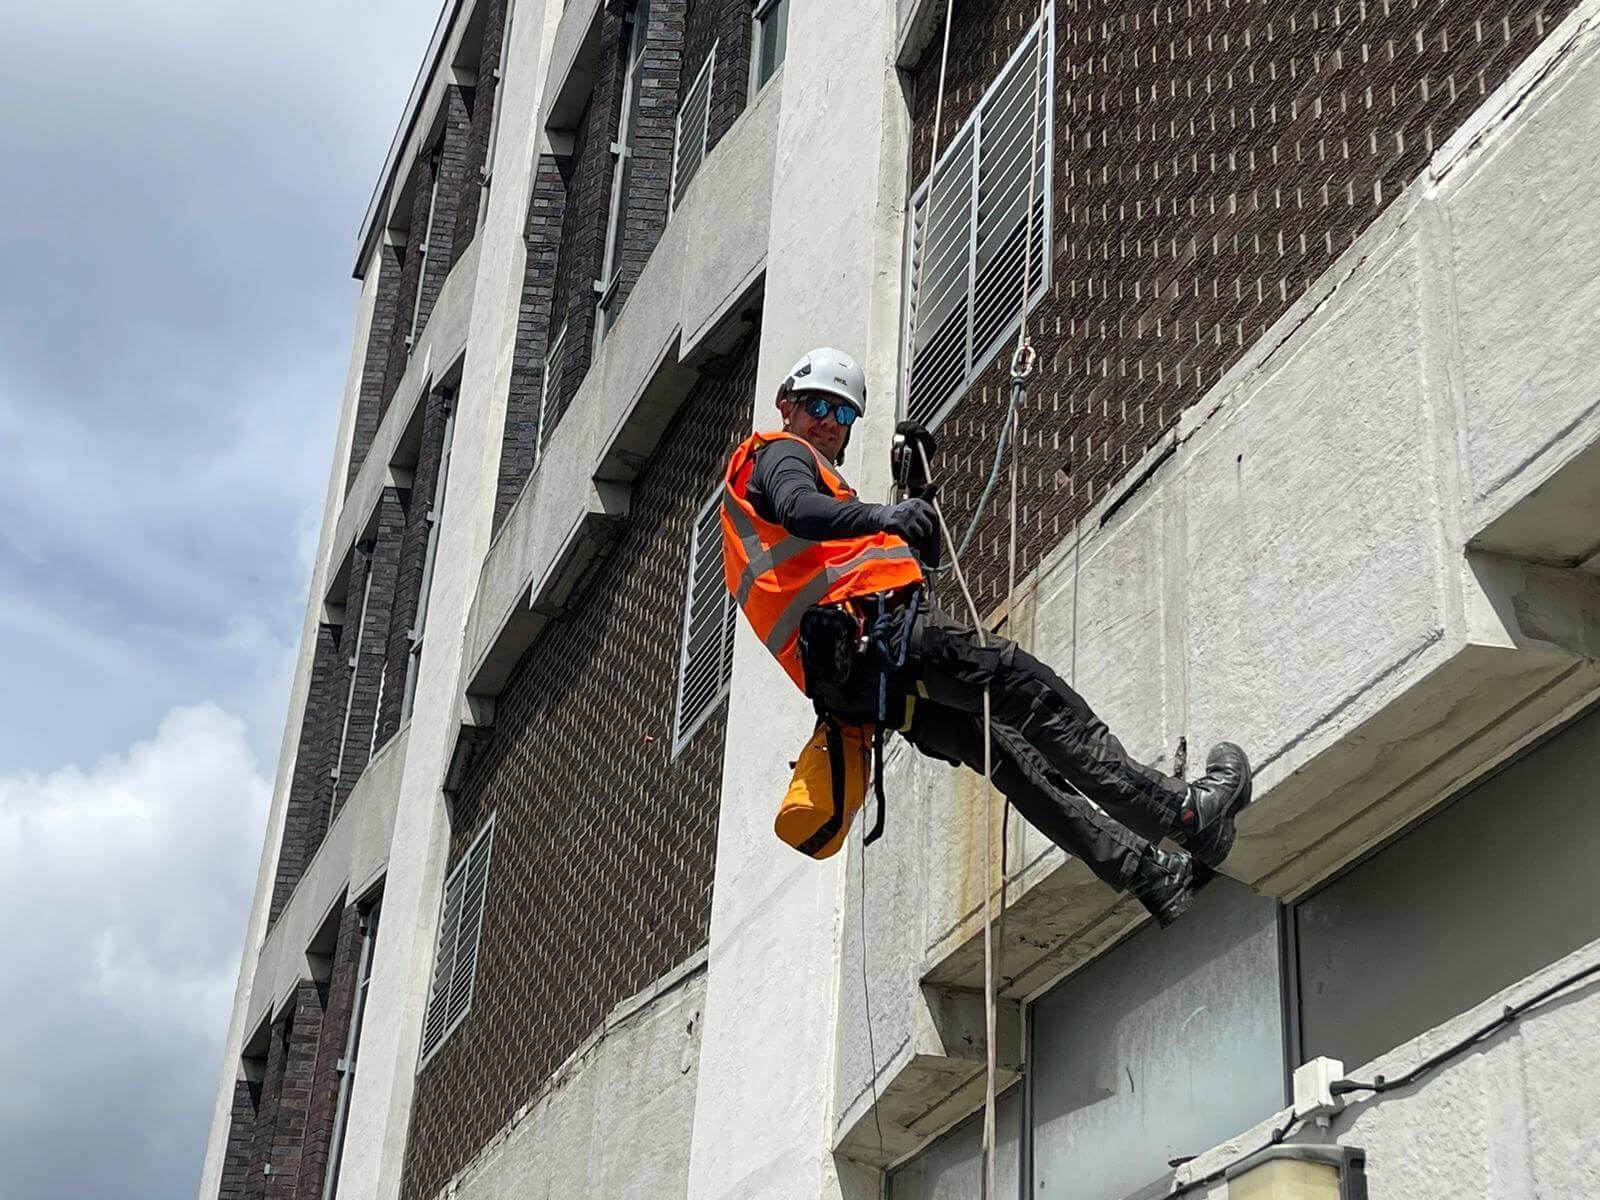 Glasgow based Rope Access Services